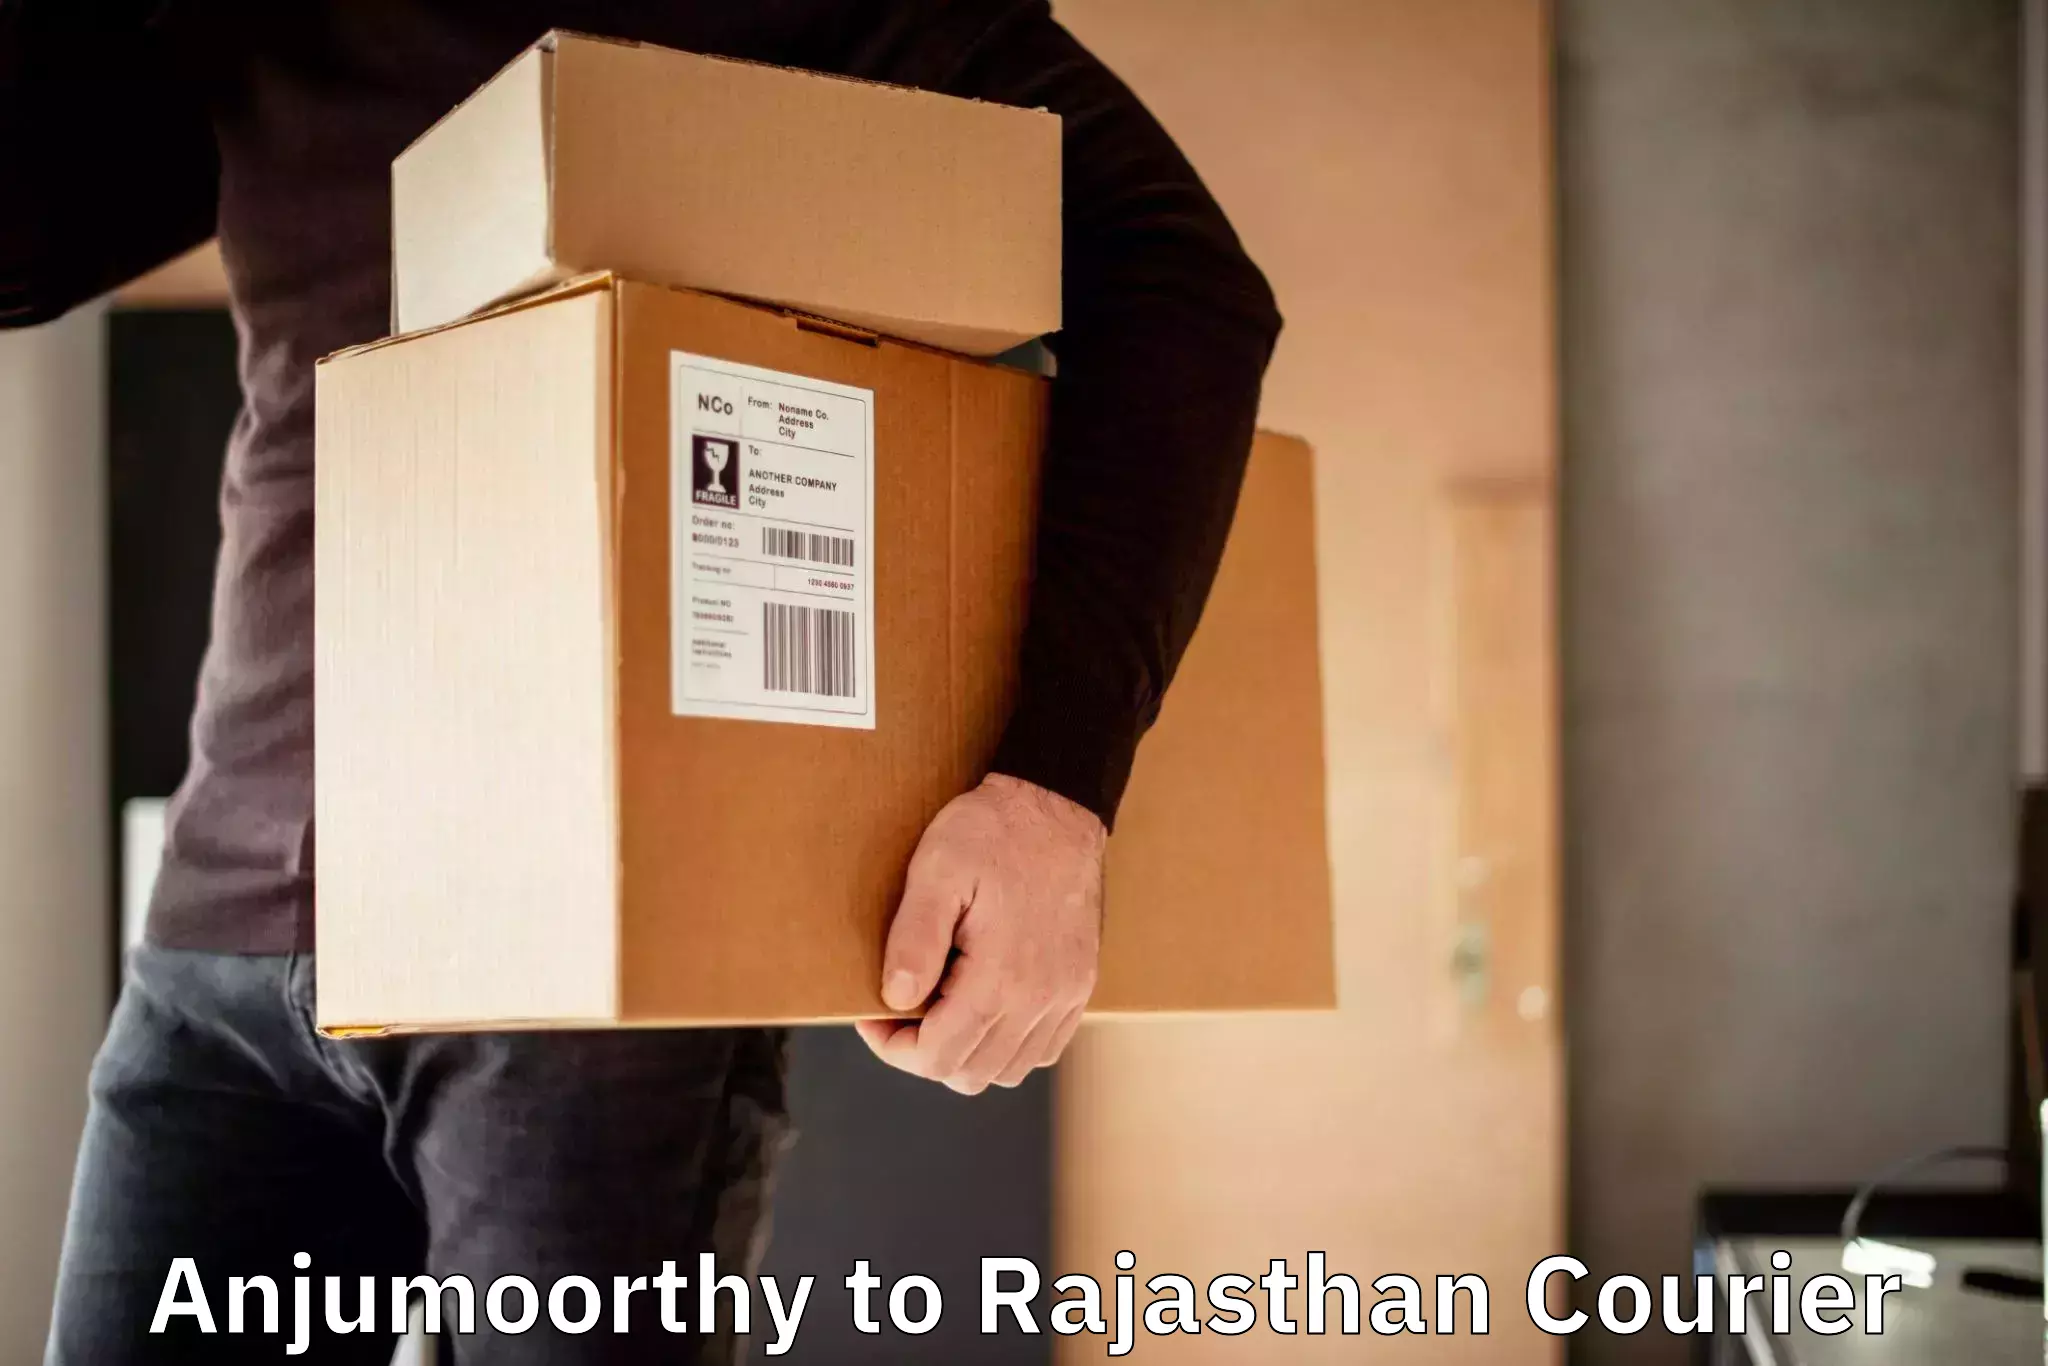 Next-day freight services Anjumoorthy to Rajasthan